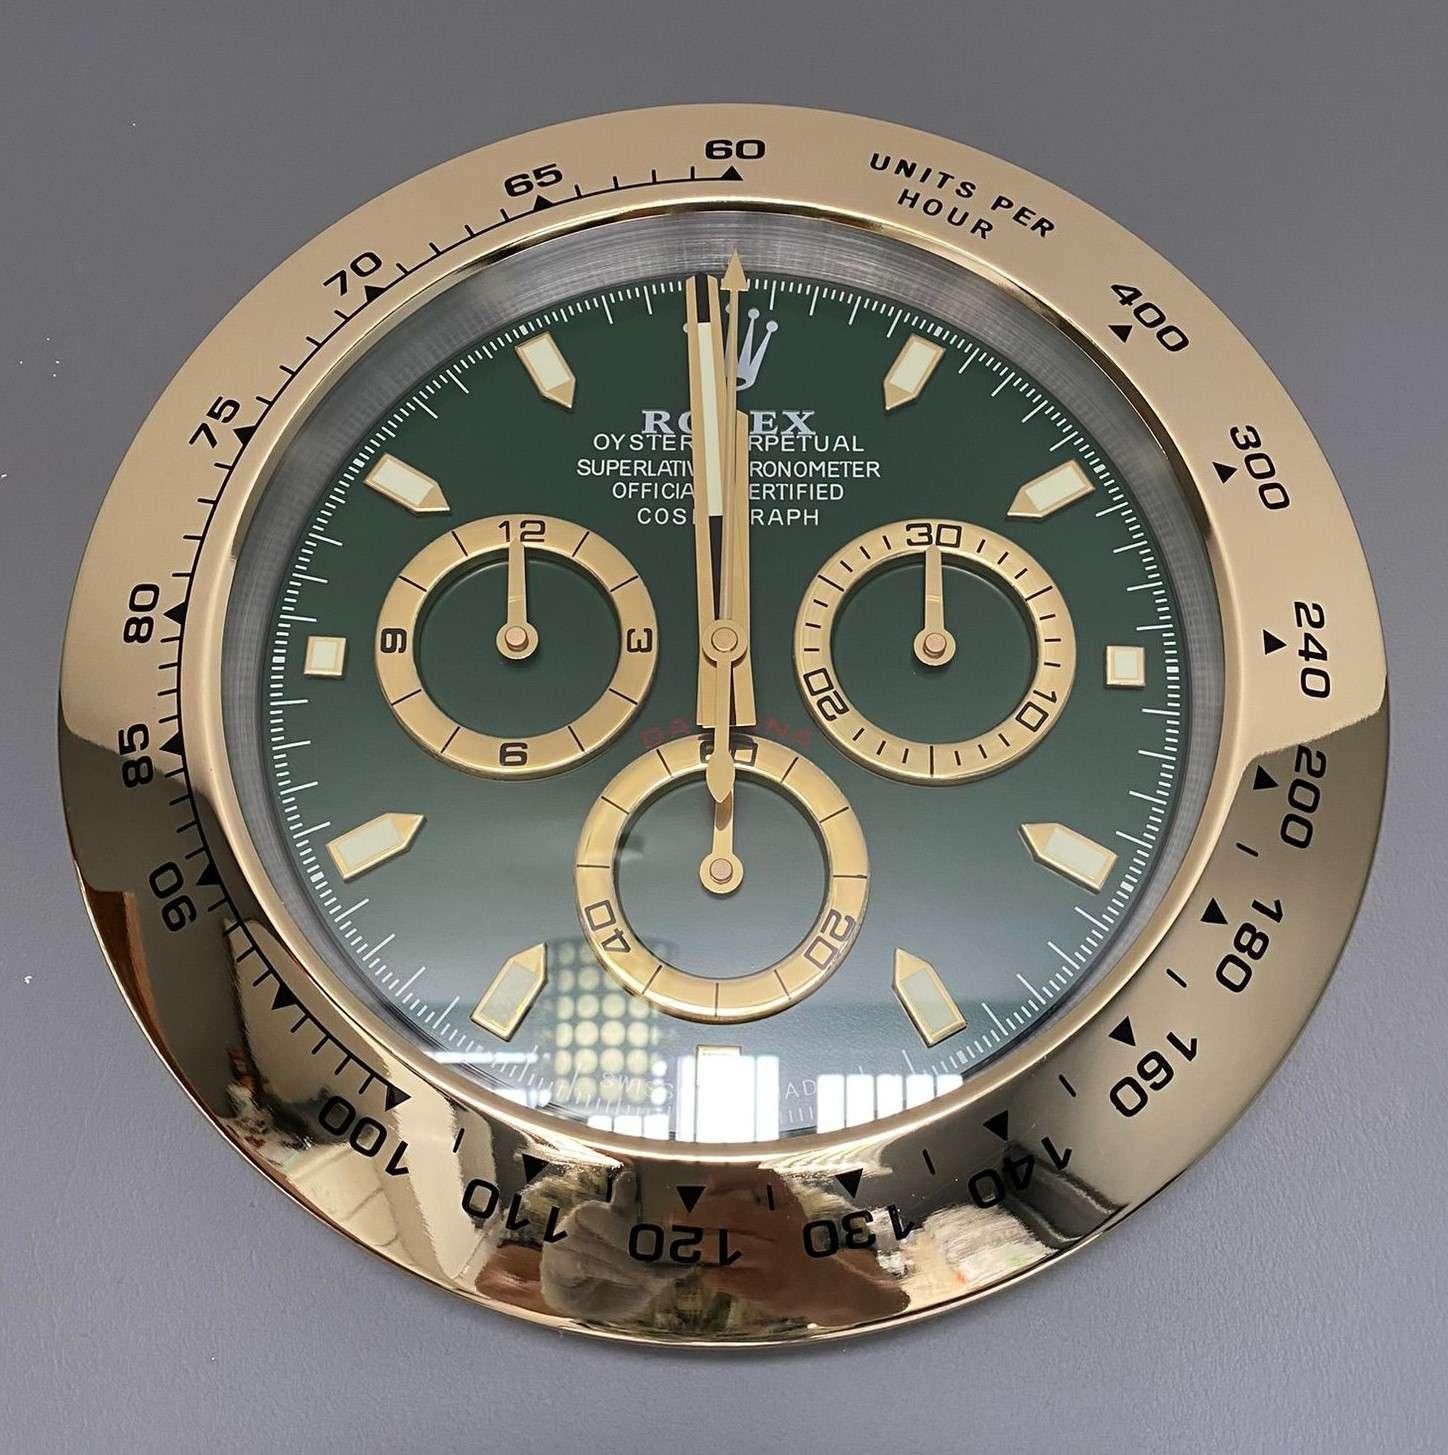 ROLEX Officially Certified Oyster Cosmograph Daytona Gold & Green Wall Clock. With luminous hands, sweeping hands.
Free international shipping.